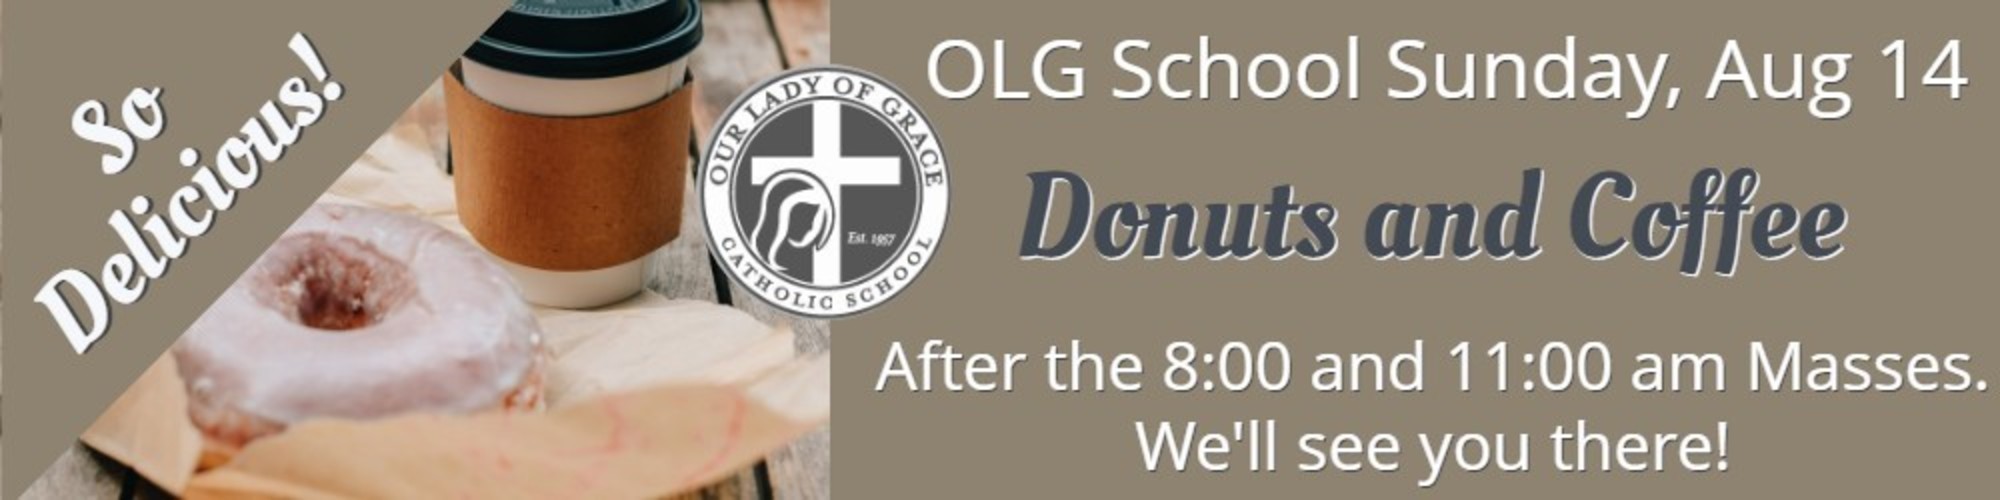 School Sunday Aug 14 Donuts And Coffee